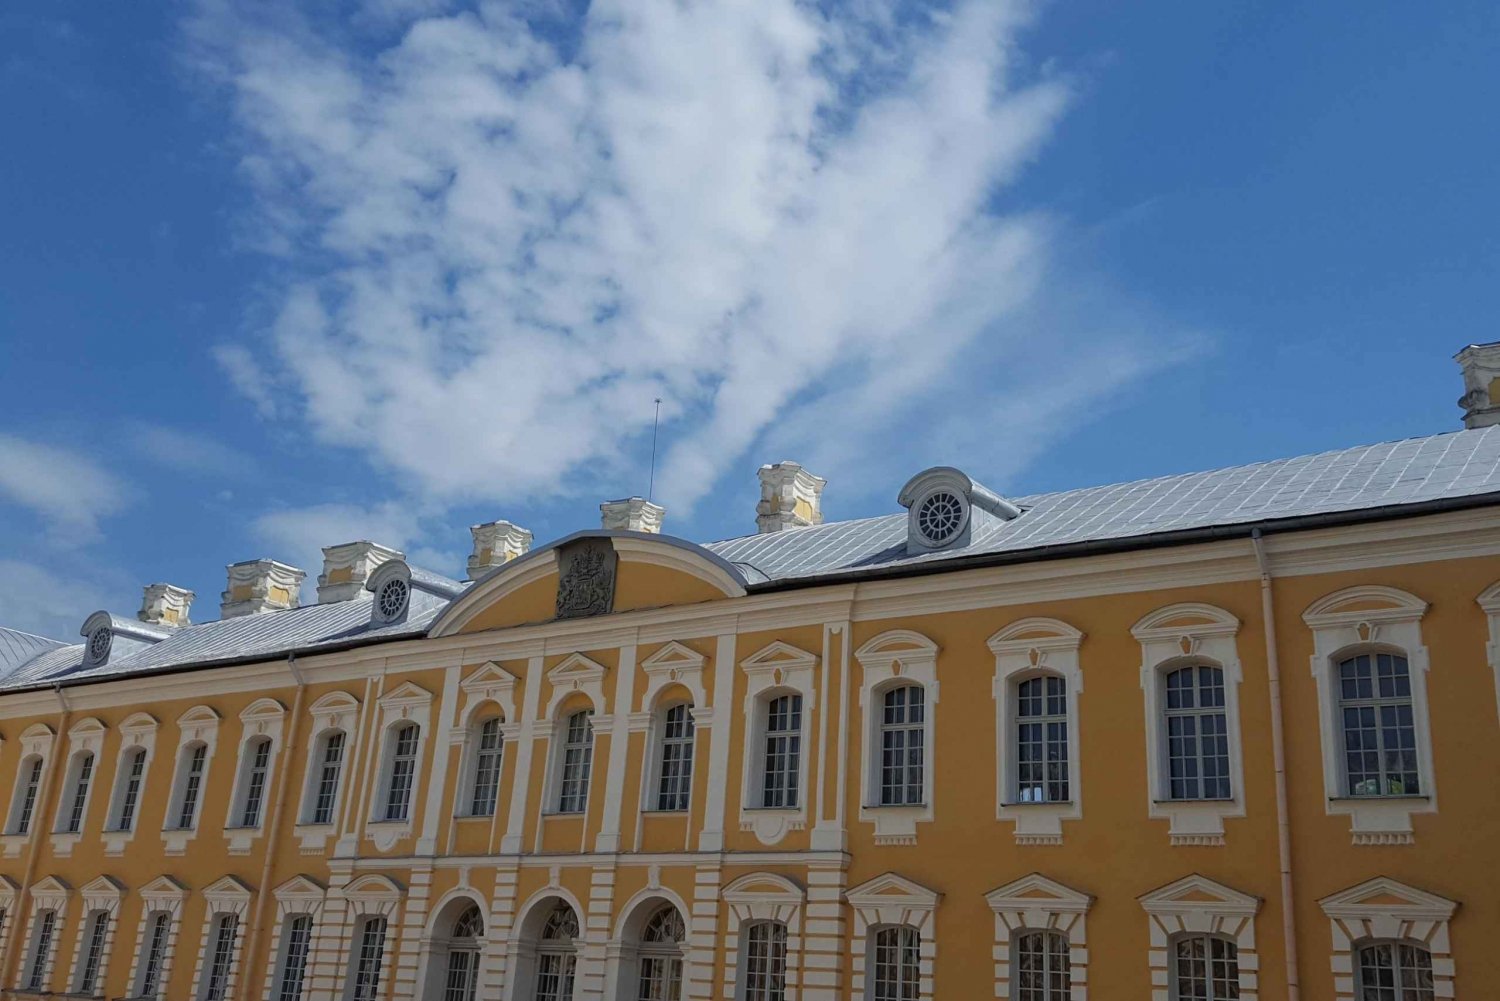 From Vilnius: Rundale Palace & Bauska Castle Tour to Riga